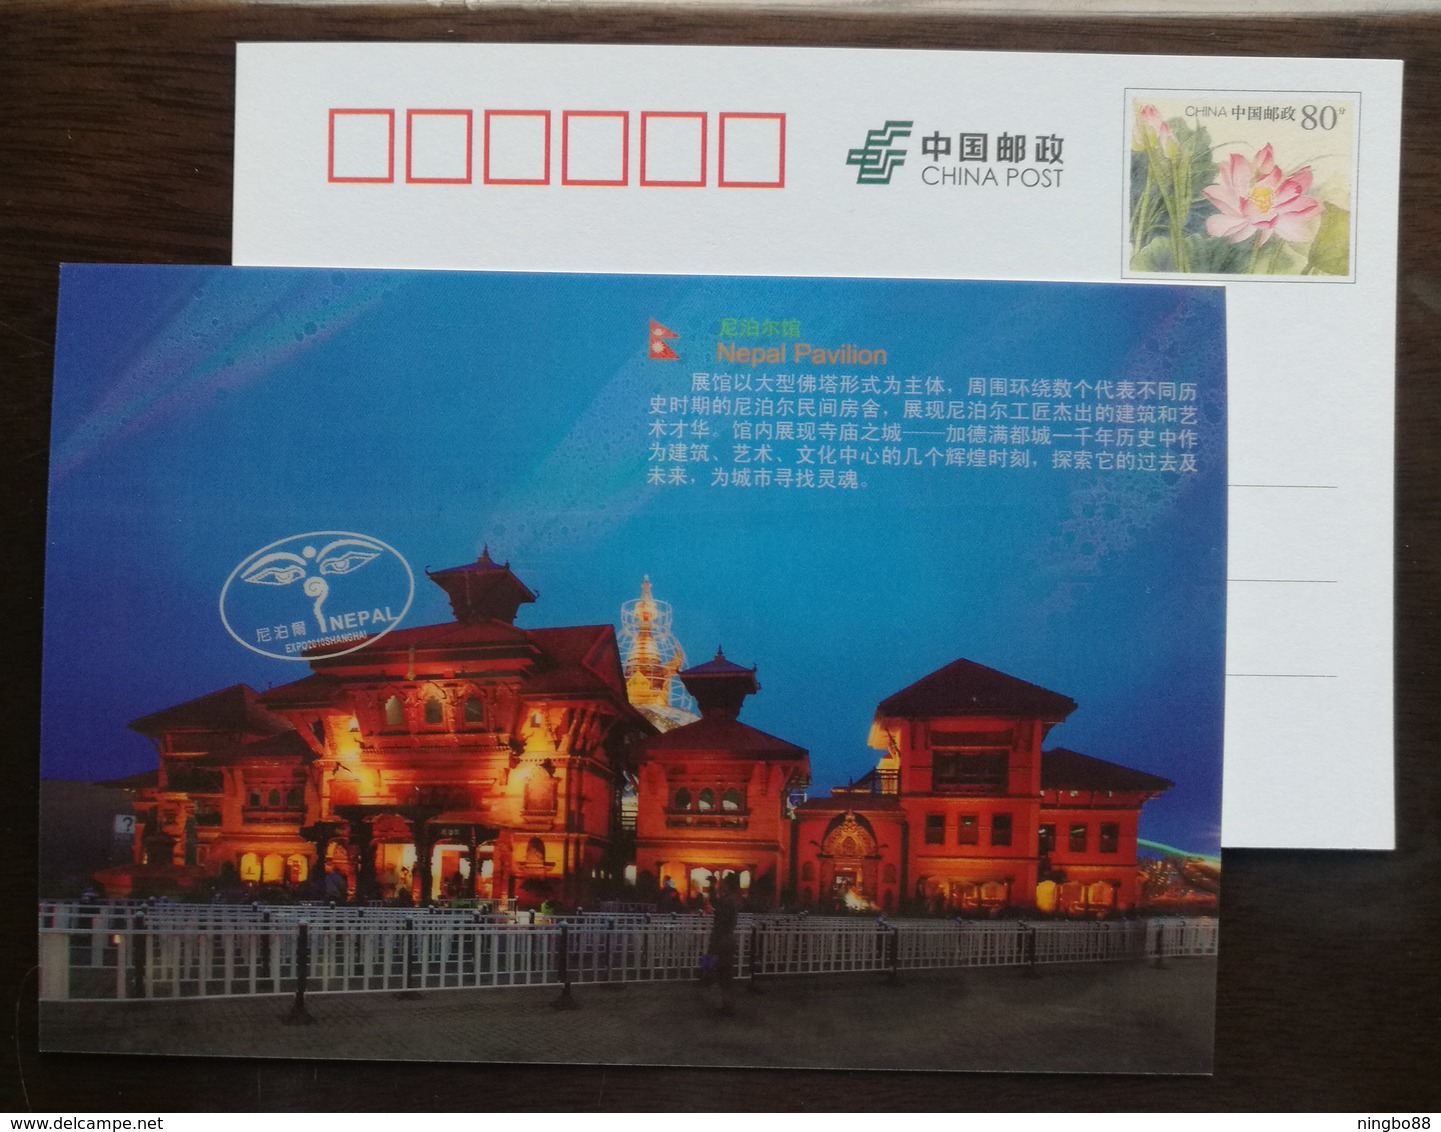 Nepal Pavilion Architecture,China 2010 Expo 2010 Shanghai World Exposition Advertising Pre-stamped Card - 2010 – Shanghai (China)